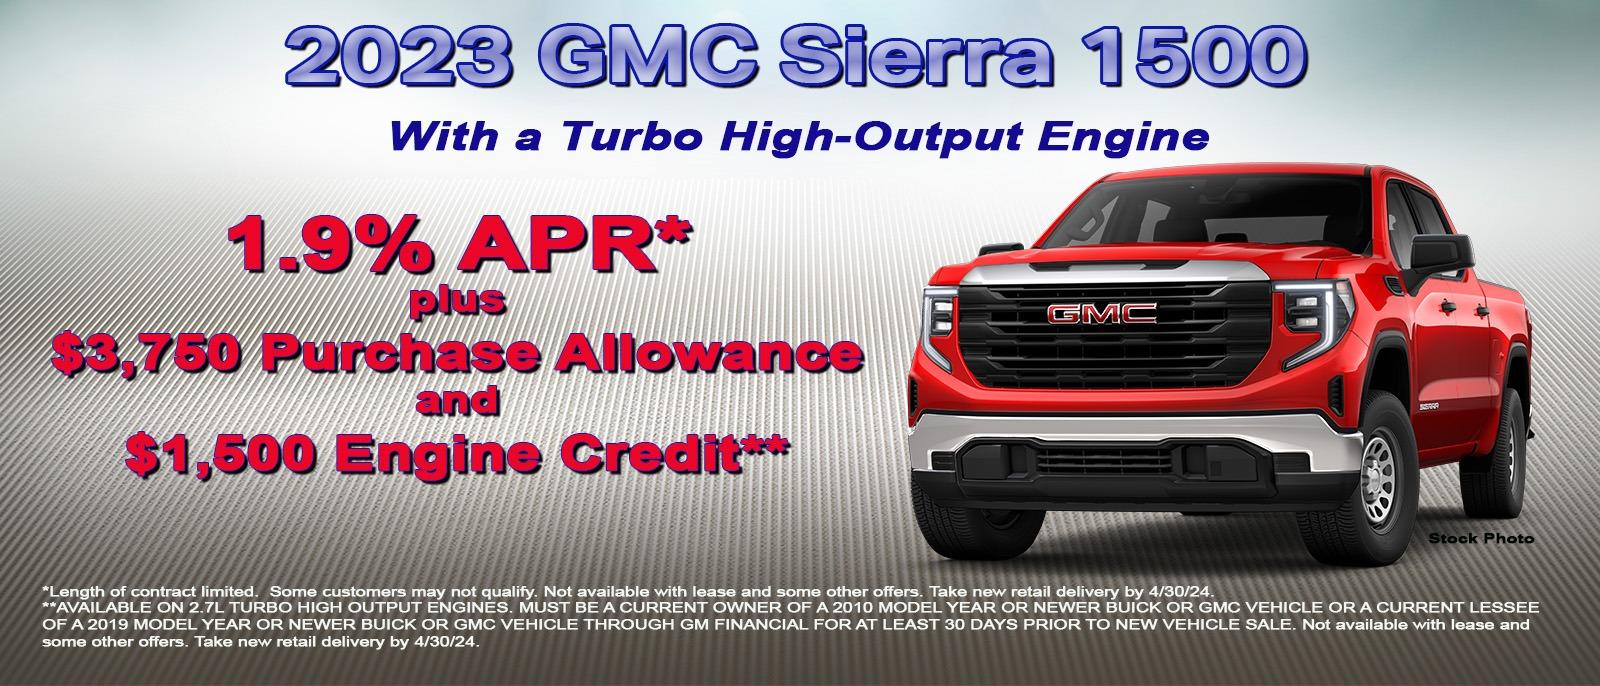 Get a great deal on your new GMC Sierra